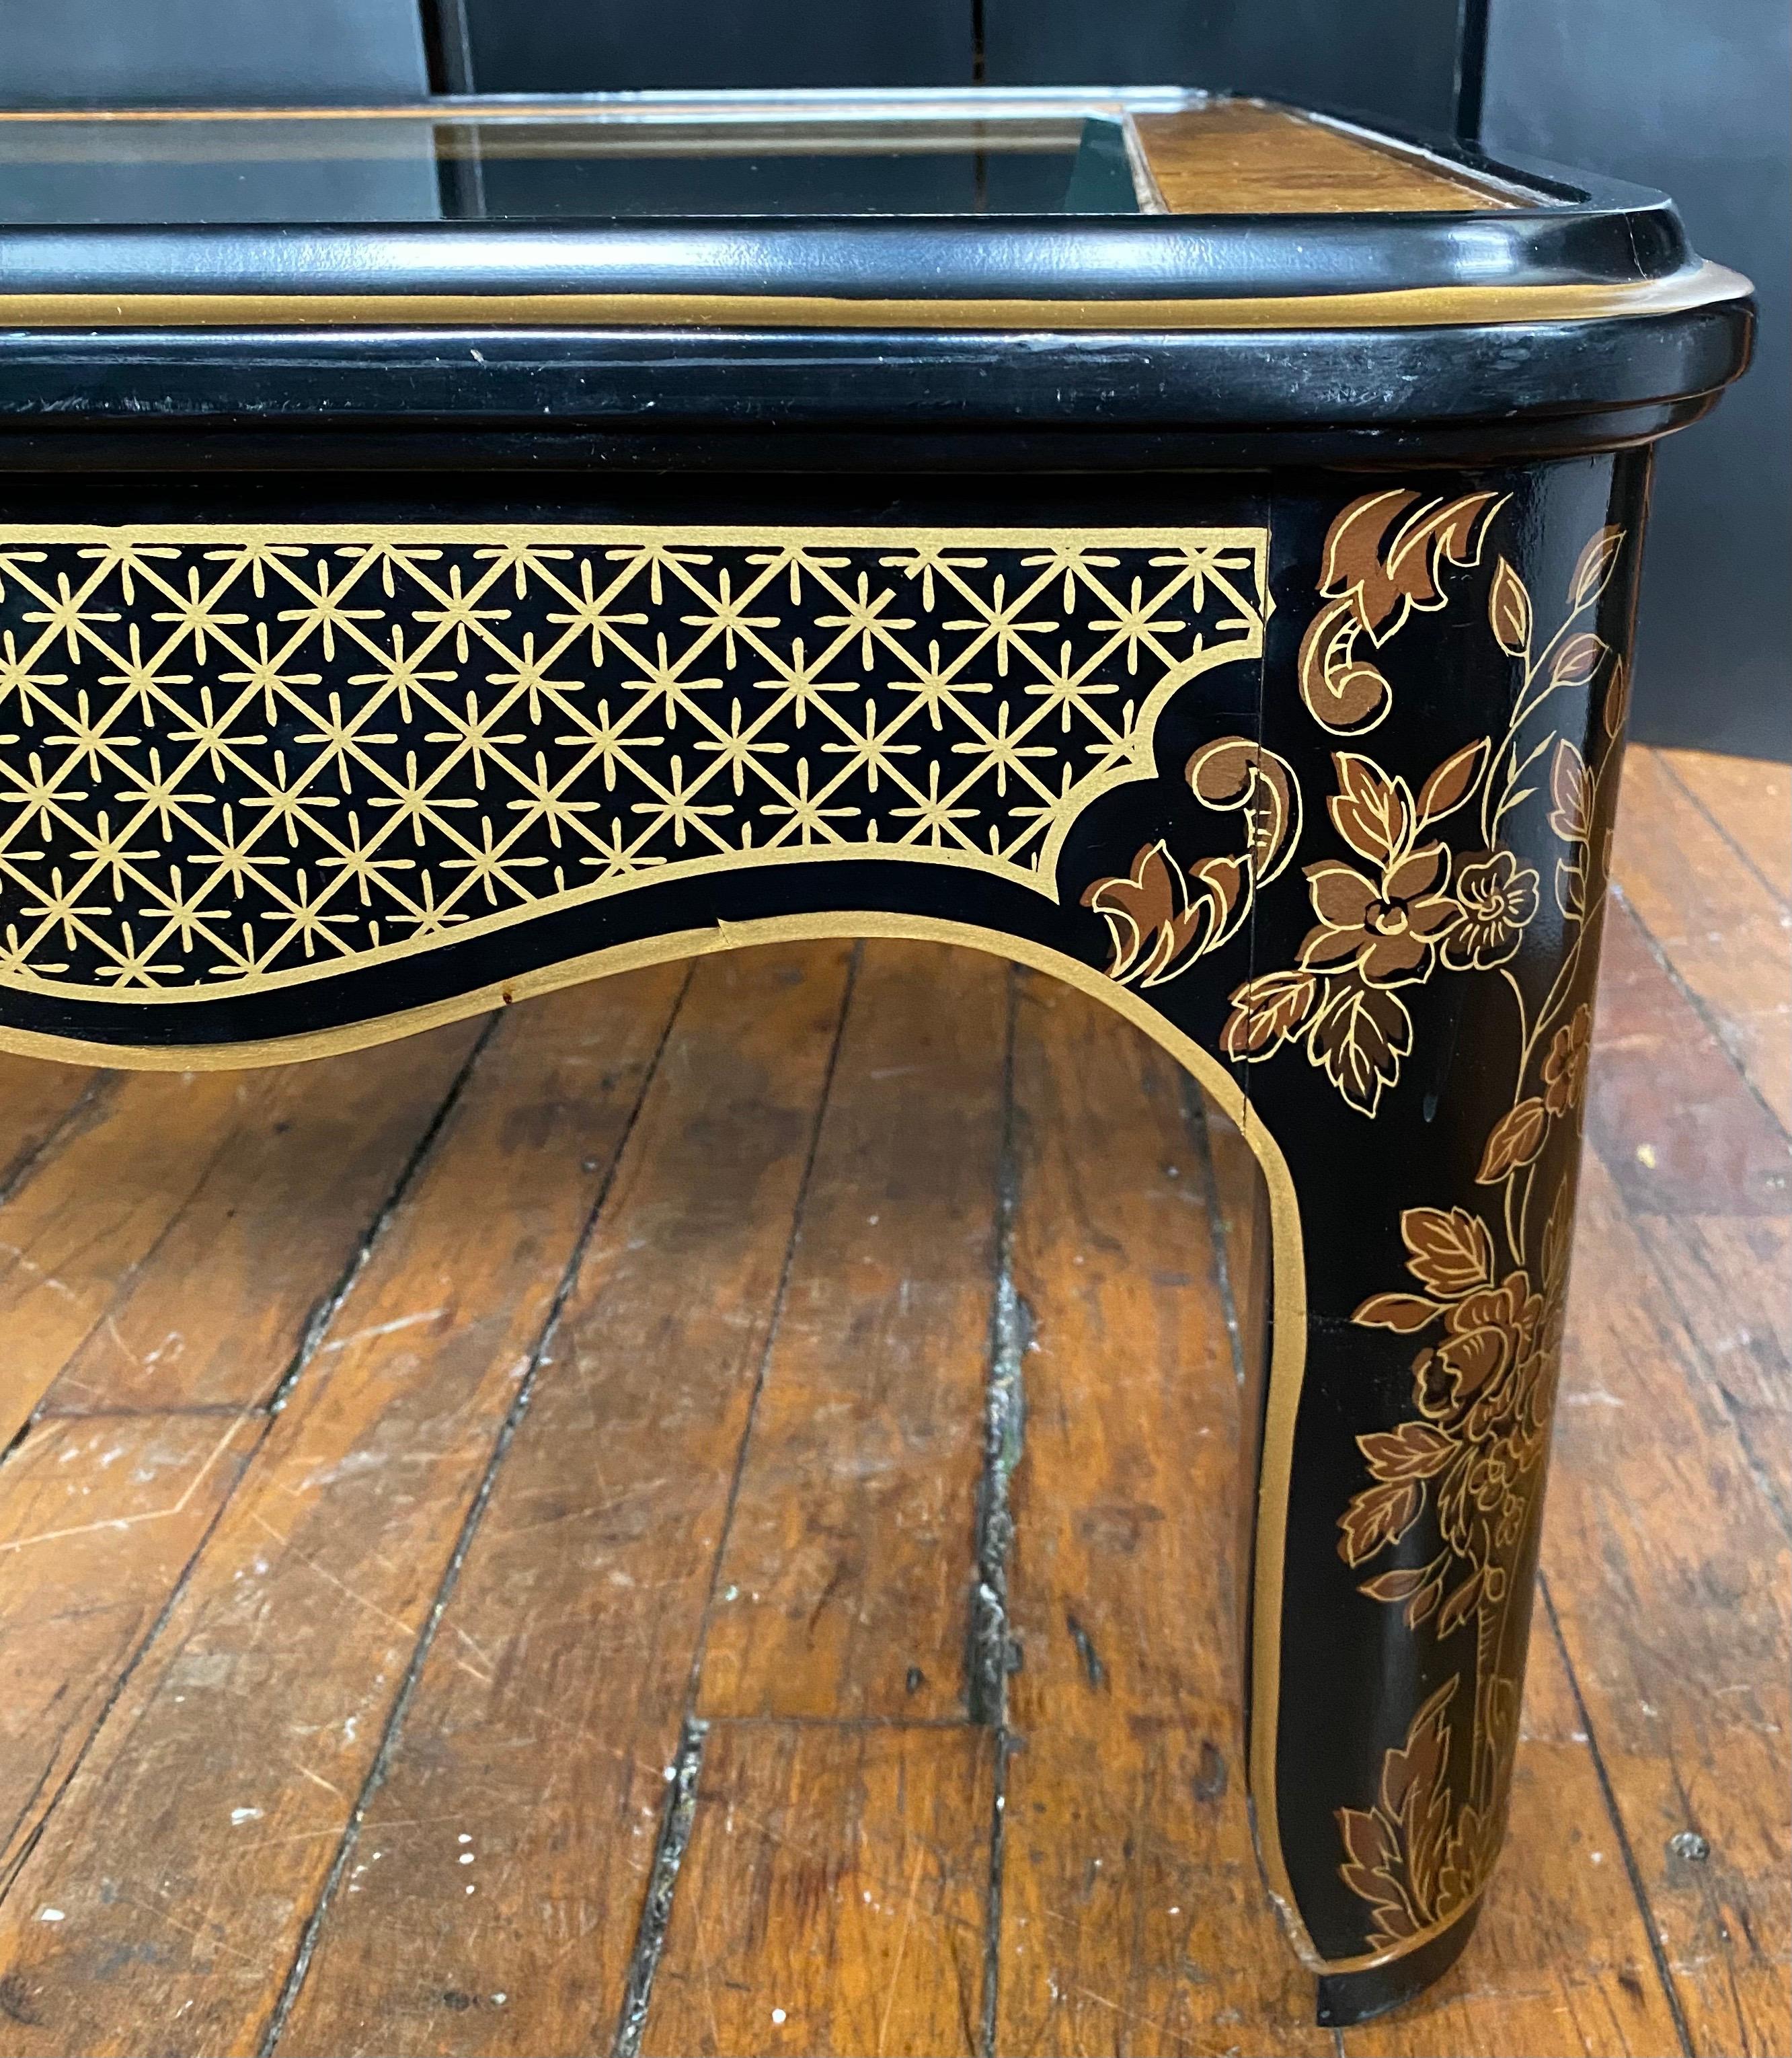 Hollywood Regency Chinoiserie Black & Gold Square Coffee Table, Drexel Et Cetera In Good Condition For Sale In Lambertville, NJ